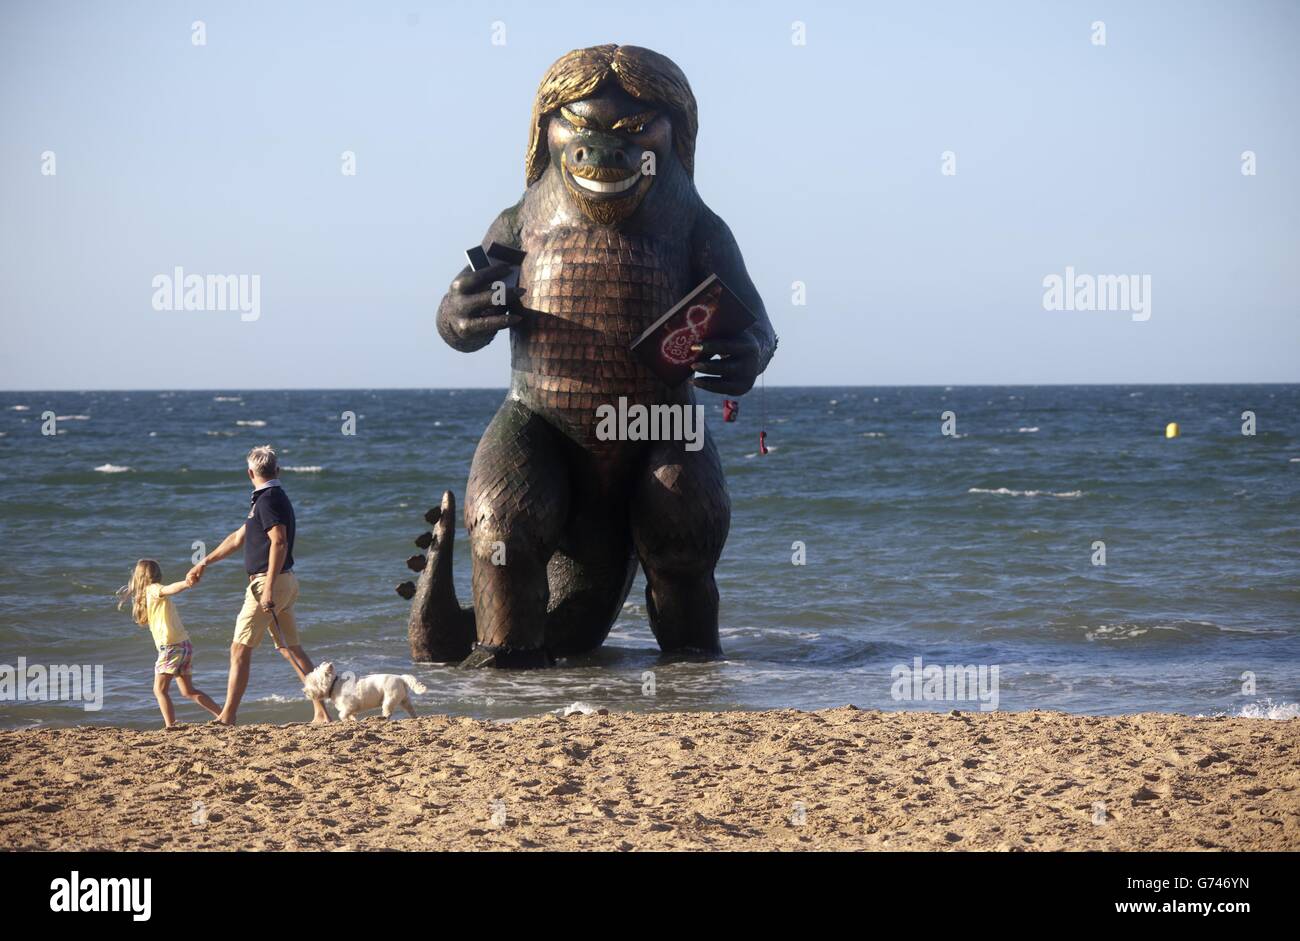 A 25 foot high sea creature resembling Richard Branson emerges from the sea on Bournemouth beach in Dorset carrying a TV, laptop, phone and mobile to celebrate the launch of Virgin Media's Big Kahuna quad-play bundle. Stock Photo